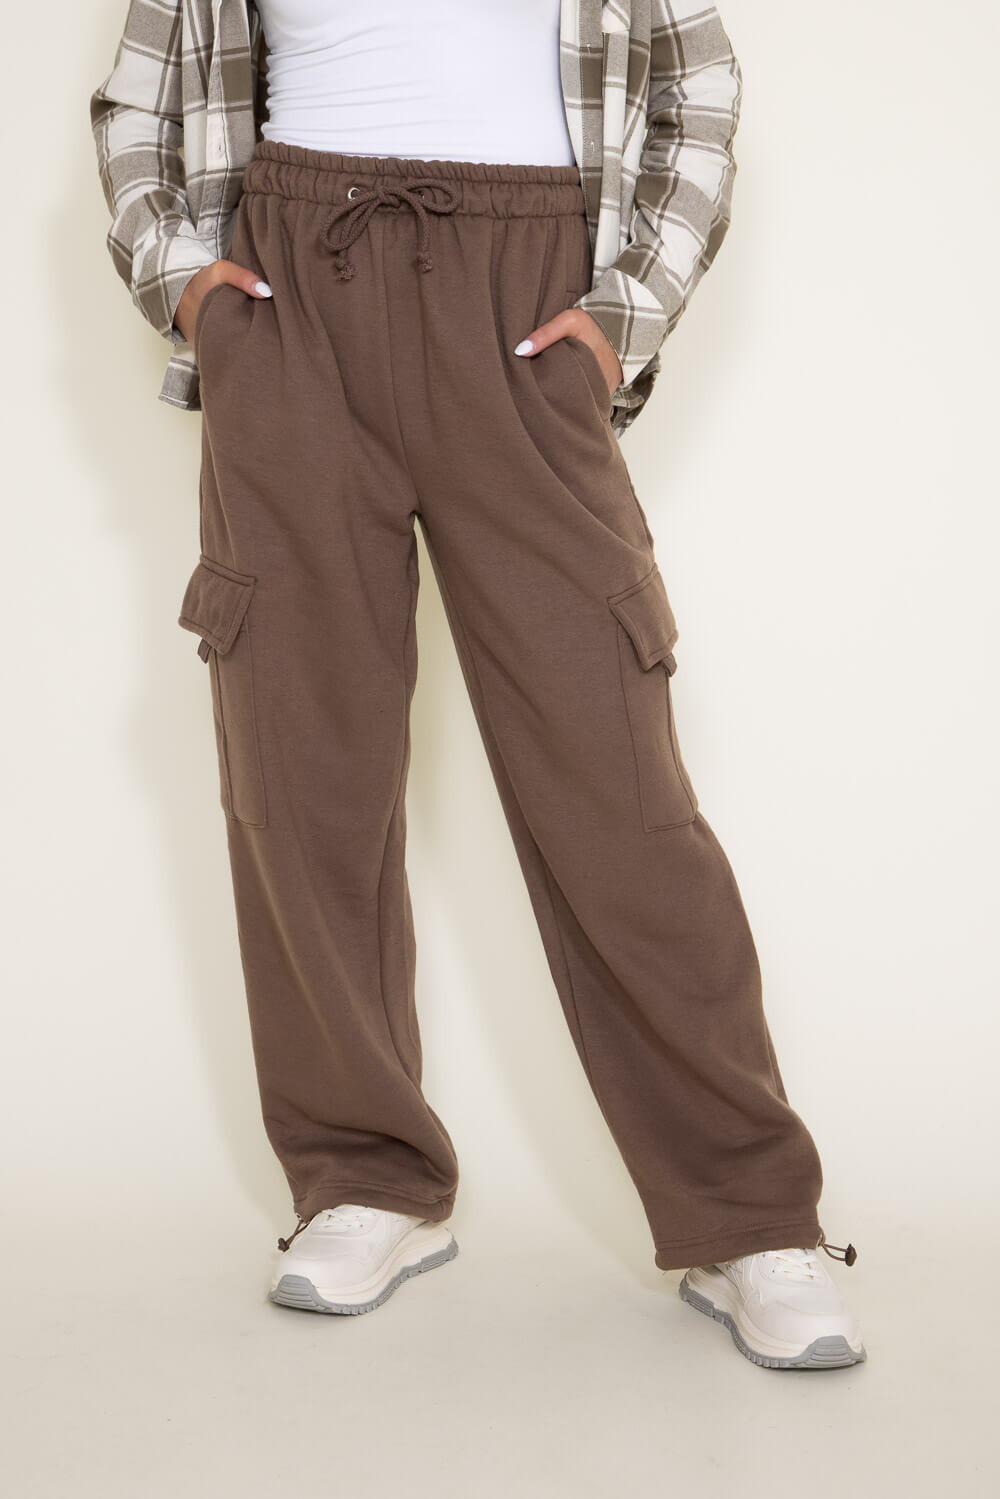 Buy Brown Trousers & Pants for Women by ORCHID BLUES Online | Ajio.com